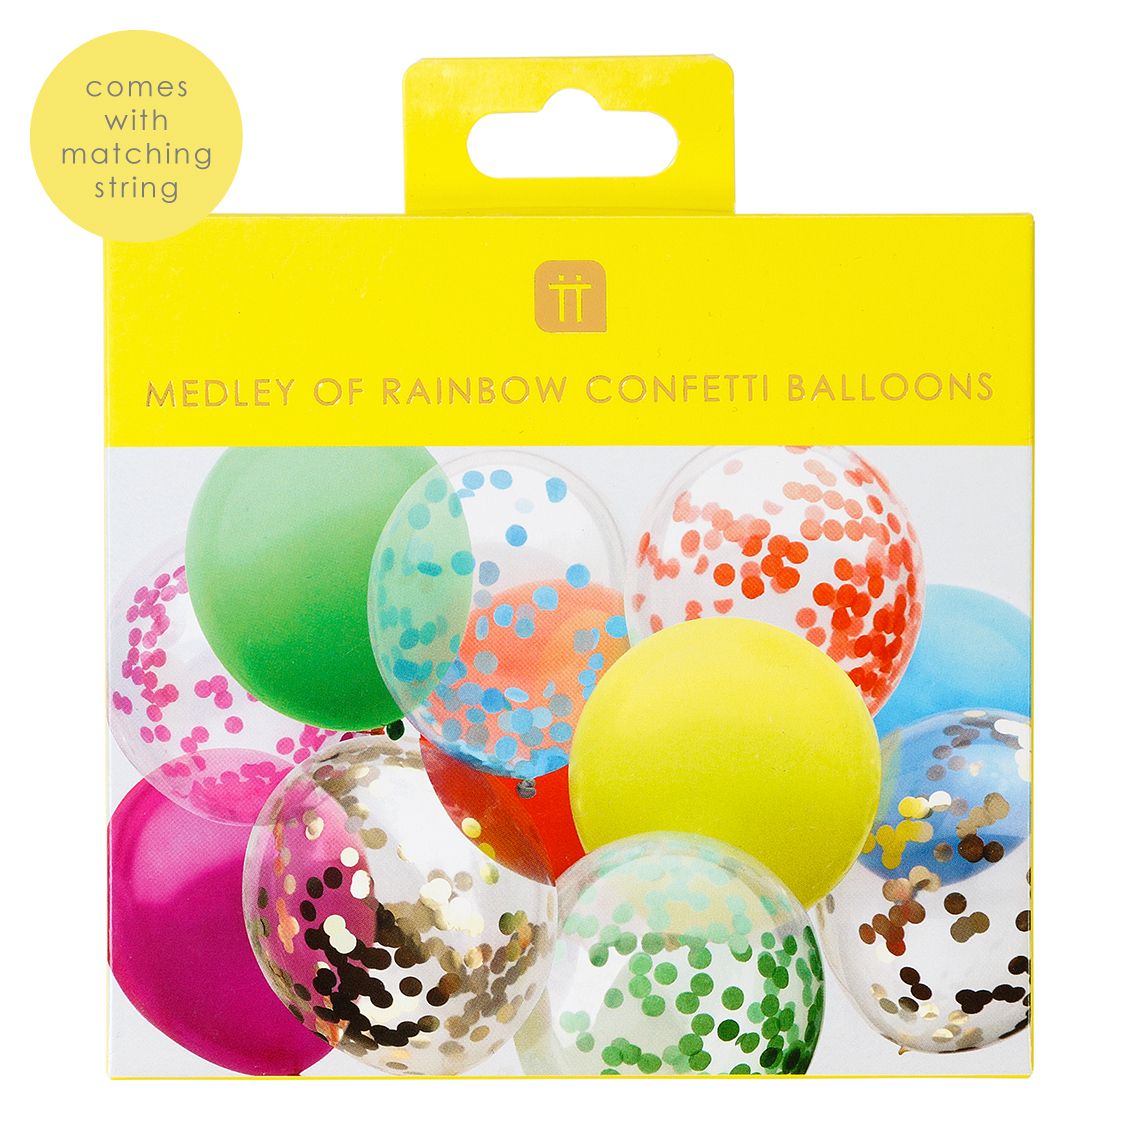 RAINBOW CONFETTI BALLOONS (7 FILLED,
5 SOLID COLOUR)